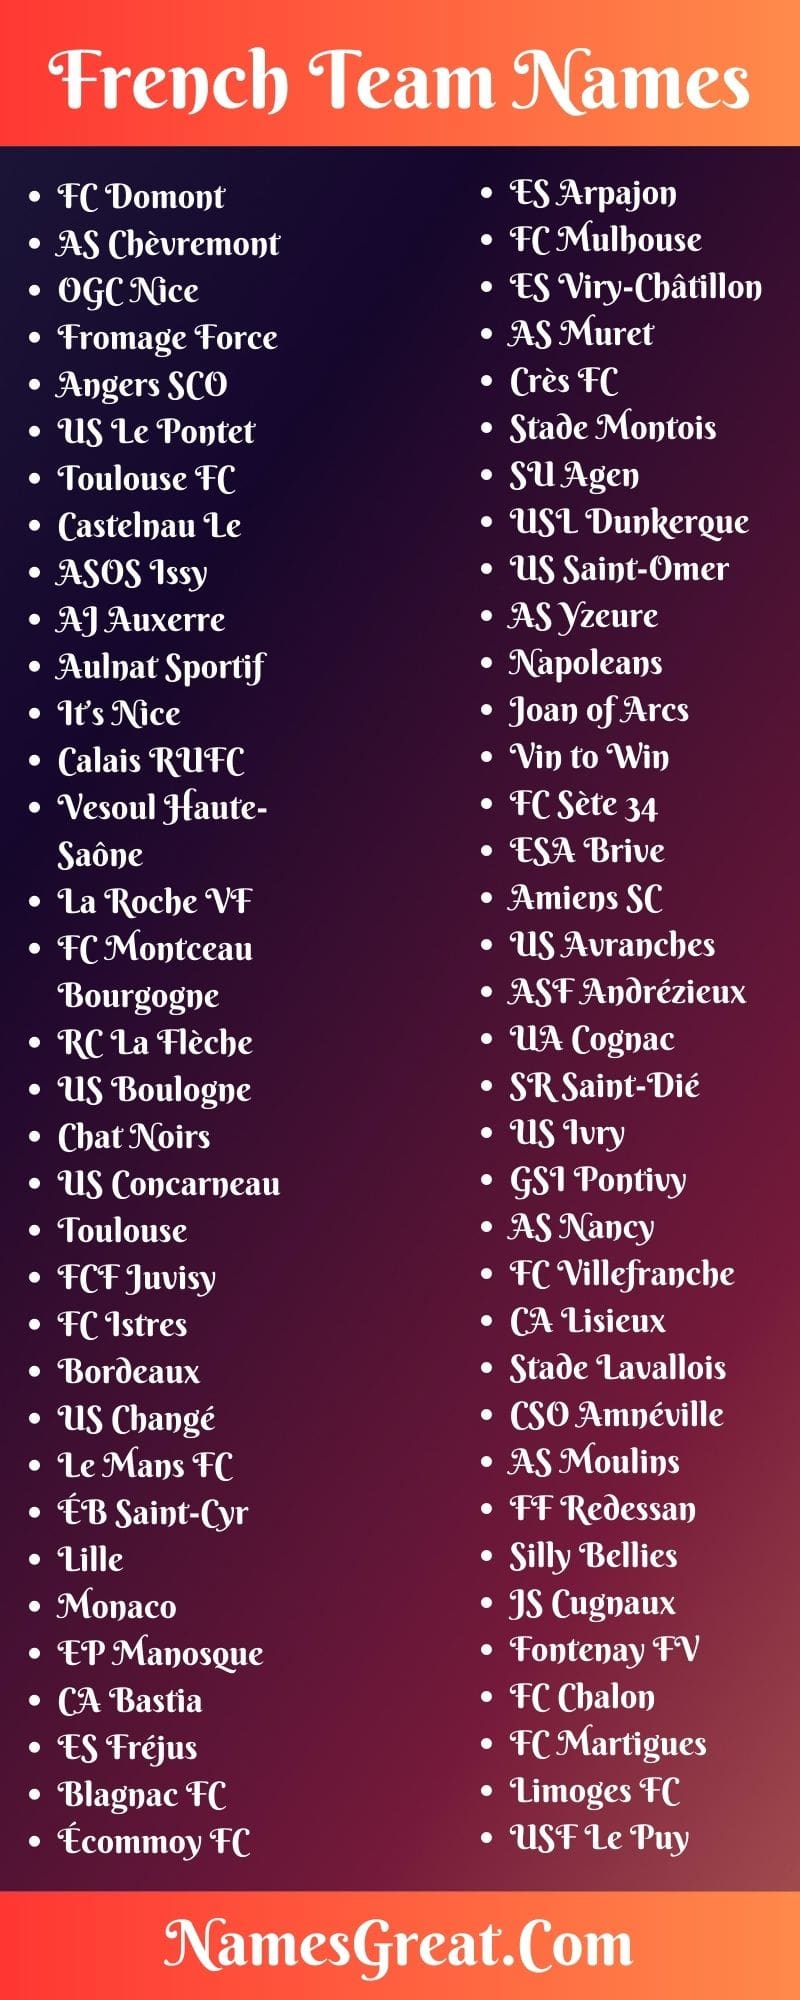 French Team Names